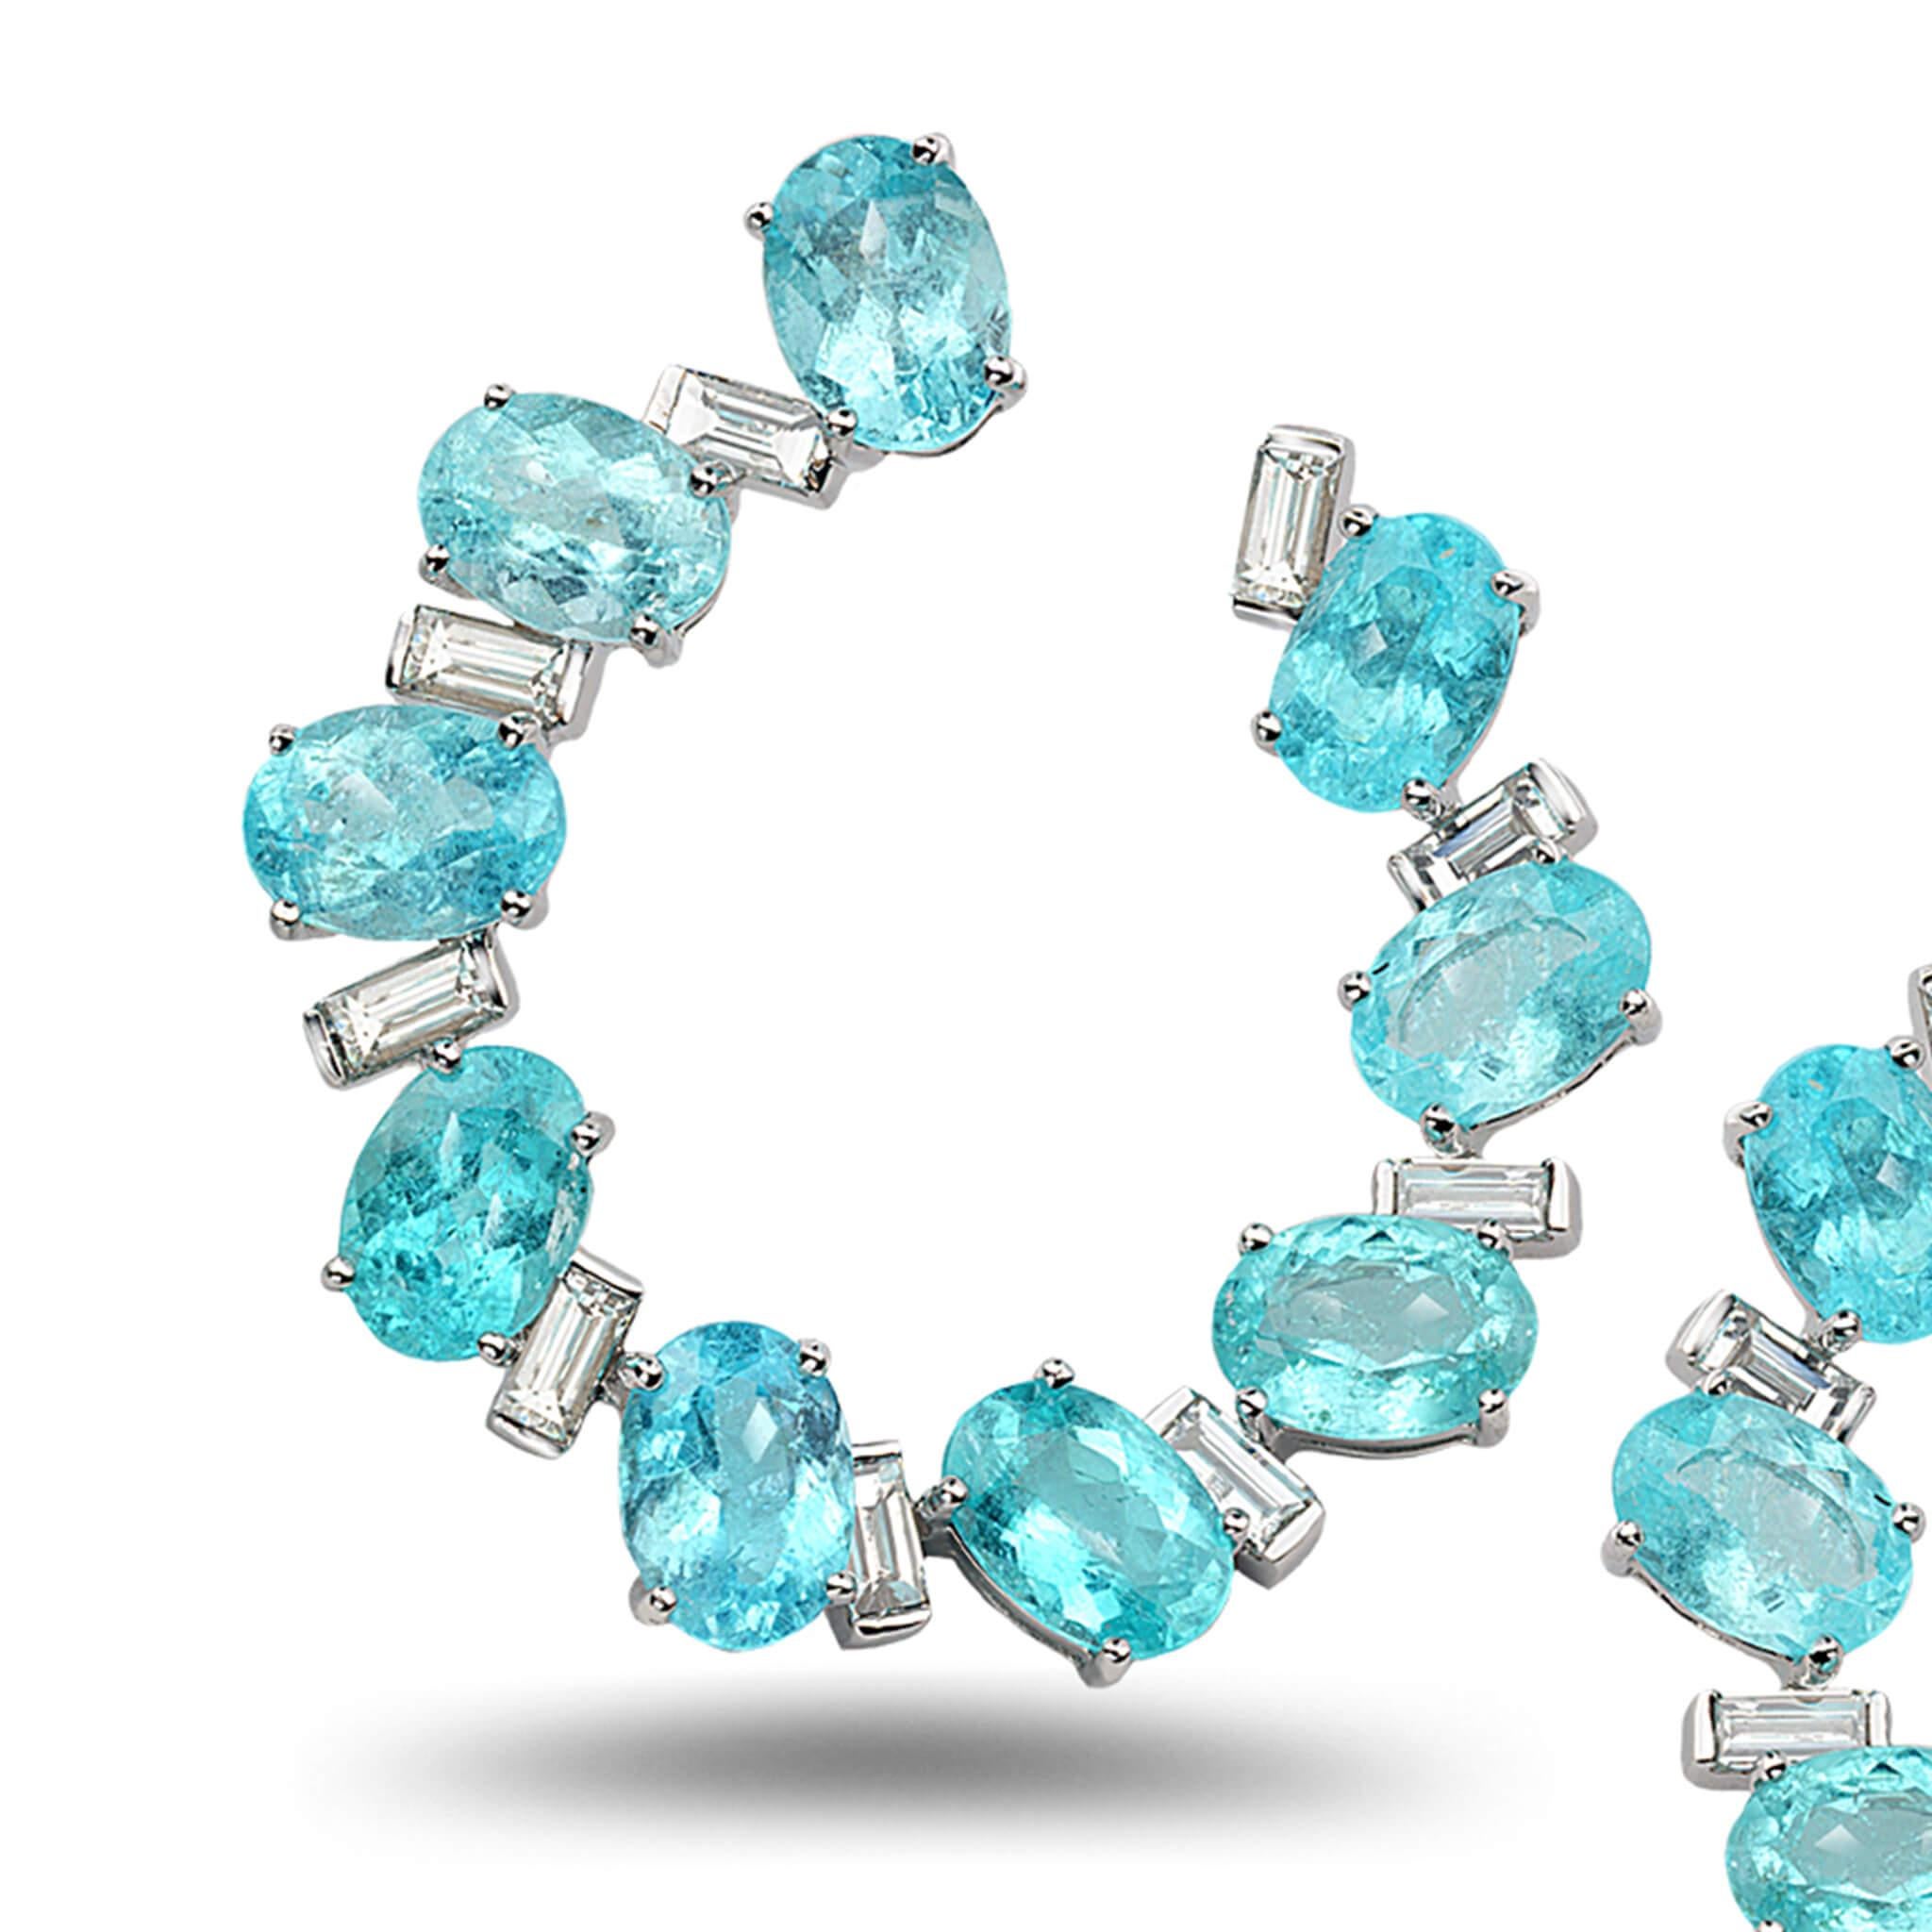 Trinity front hoop earrings set in 18K white gold with 14.46cts paraiba tourmaline and 1.49cts diamond.
